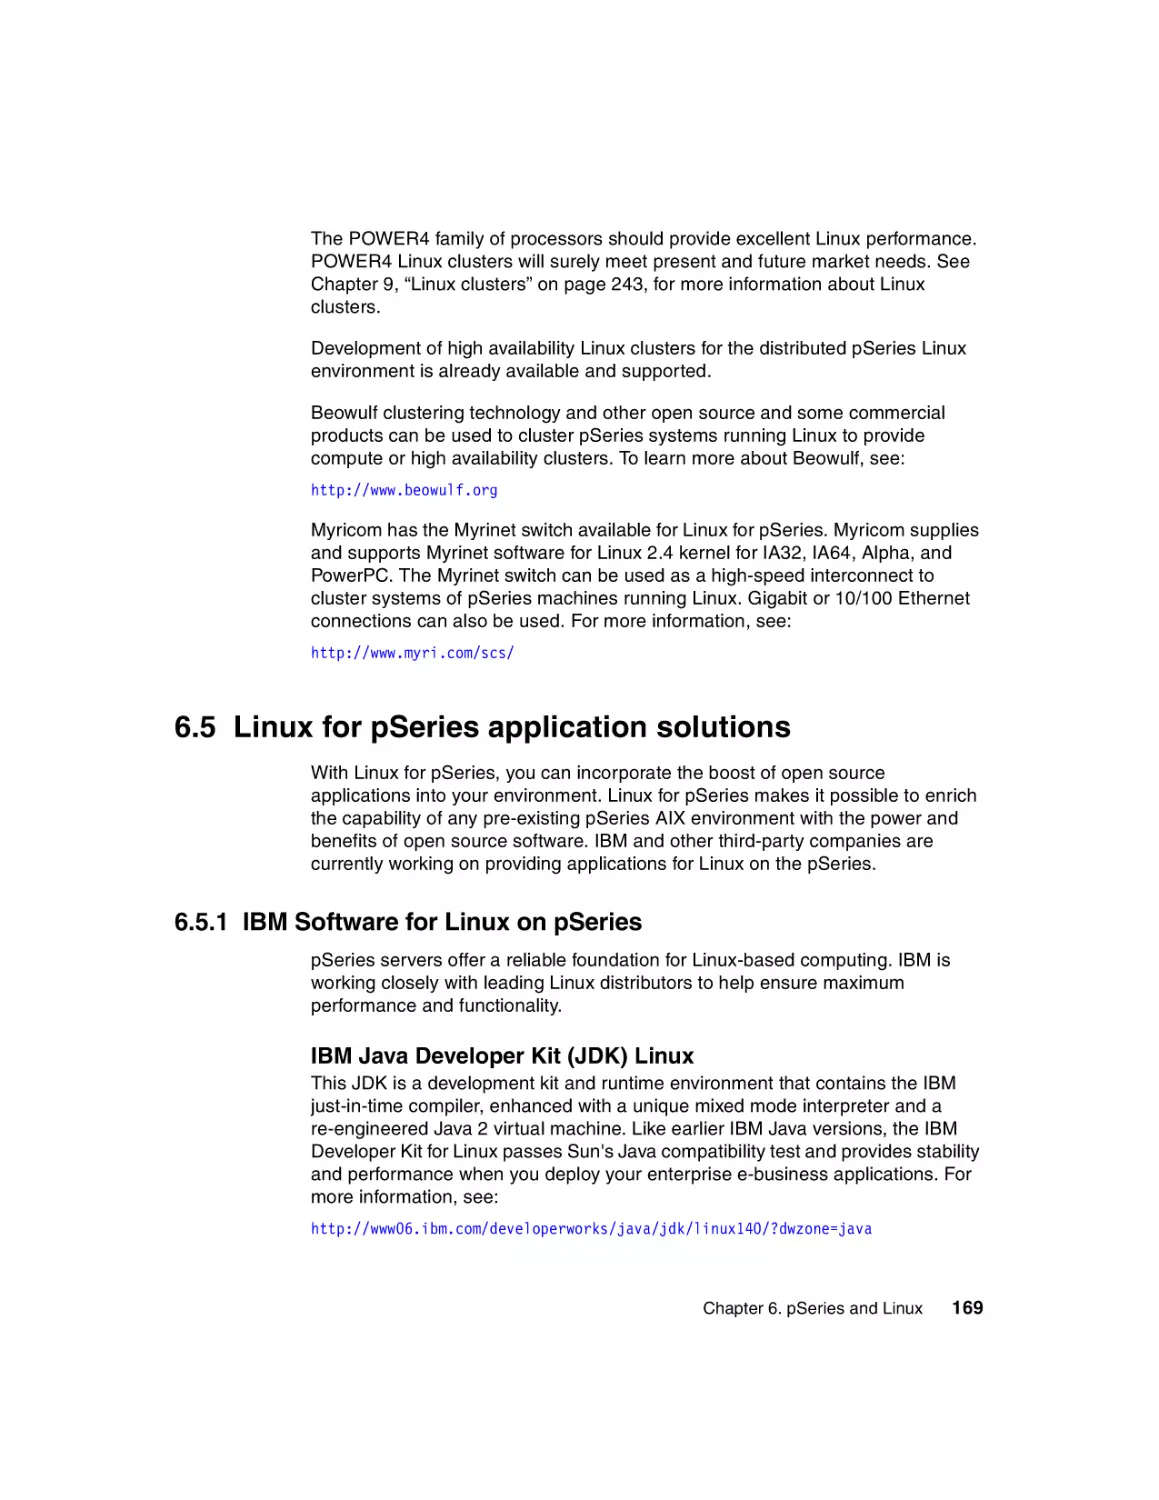 6.5 Linux for pSeries application solutions
6.5.1 IBM Software for Linux on pSeries